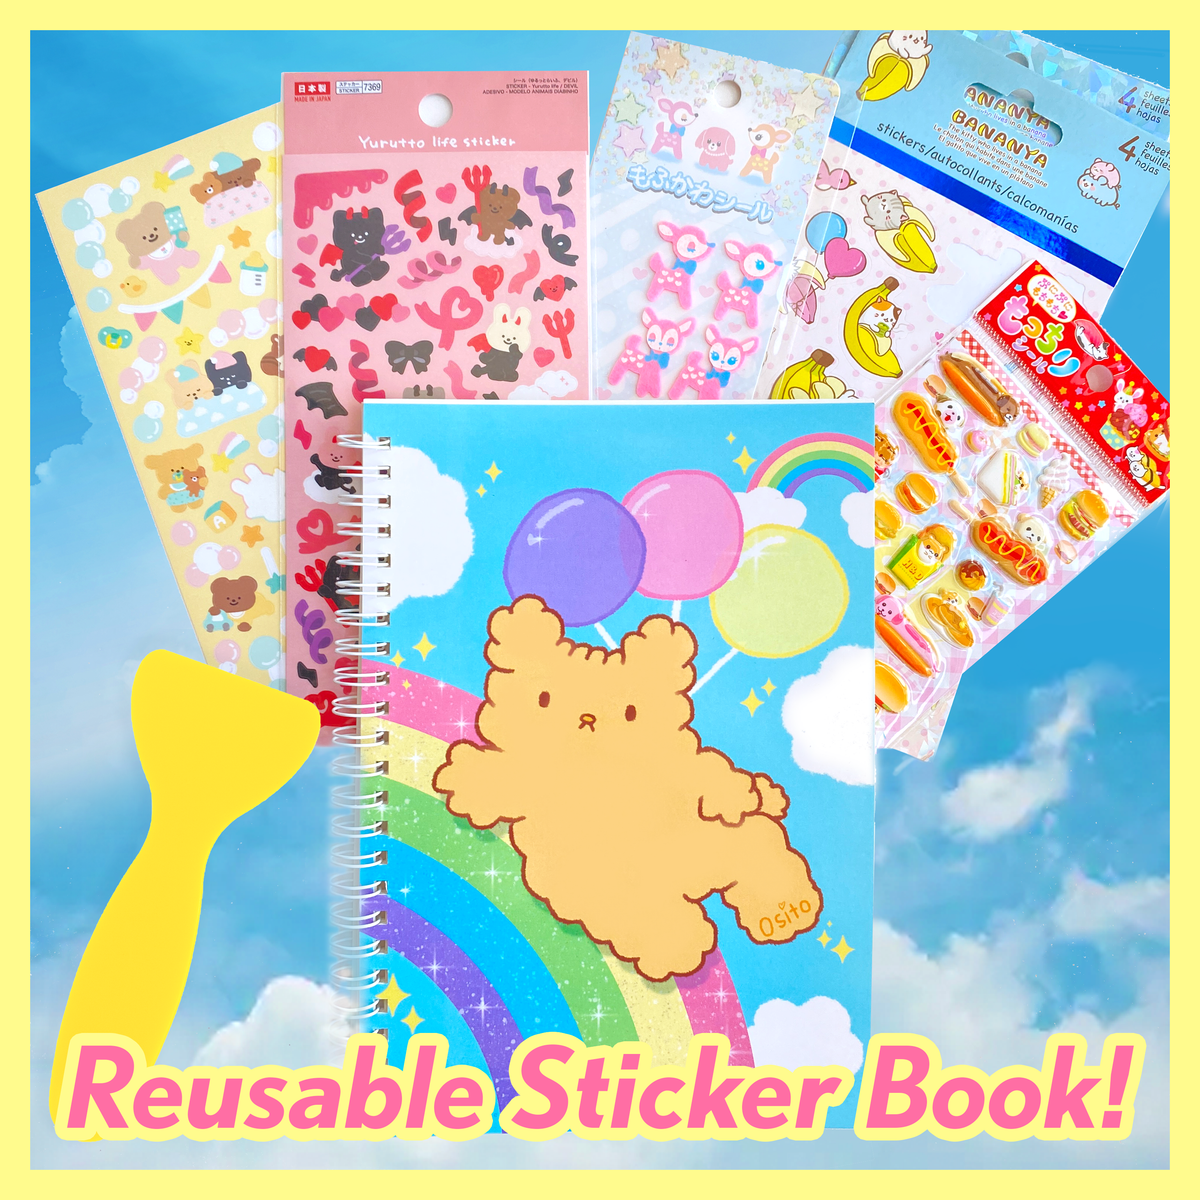 Reusable Sticker Collection Book 30ct. Sticker Bomb Reuse Sticker Book  Sticker Book Gift Sticker Pack Gifts for Sticker Collectors 